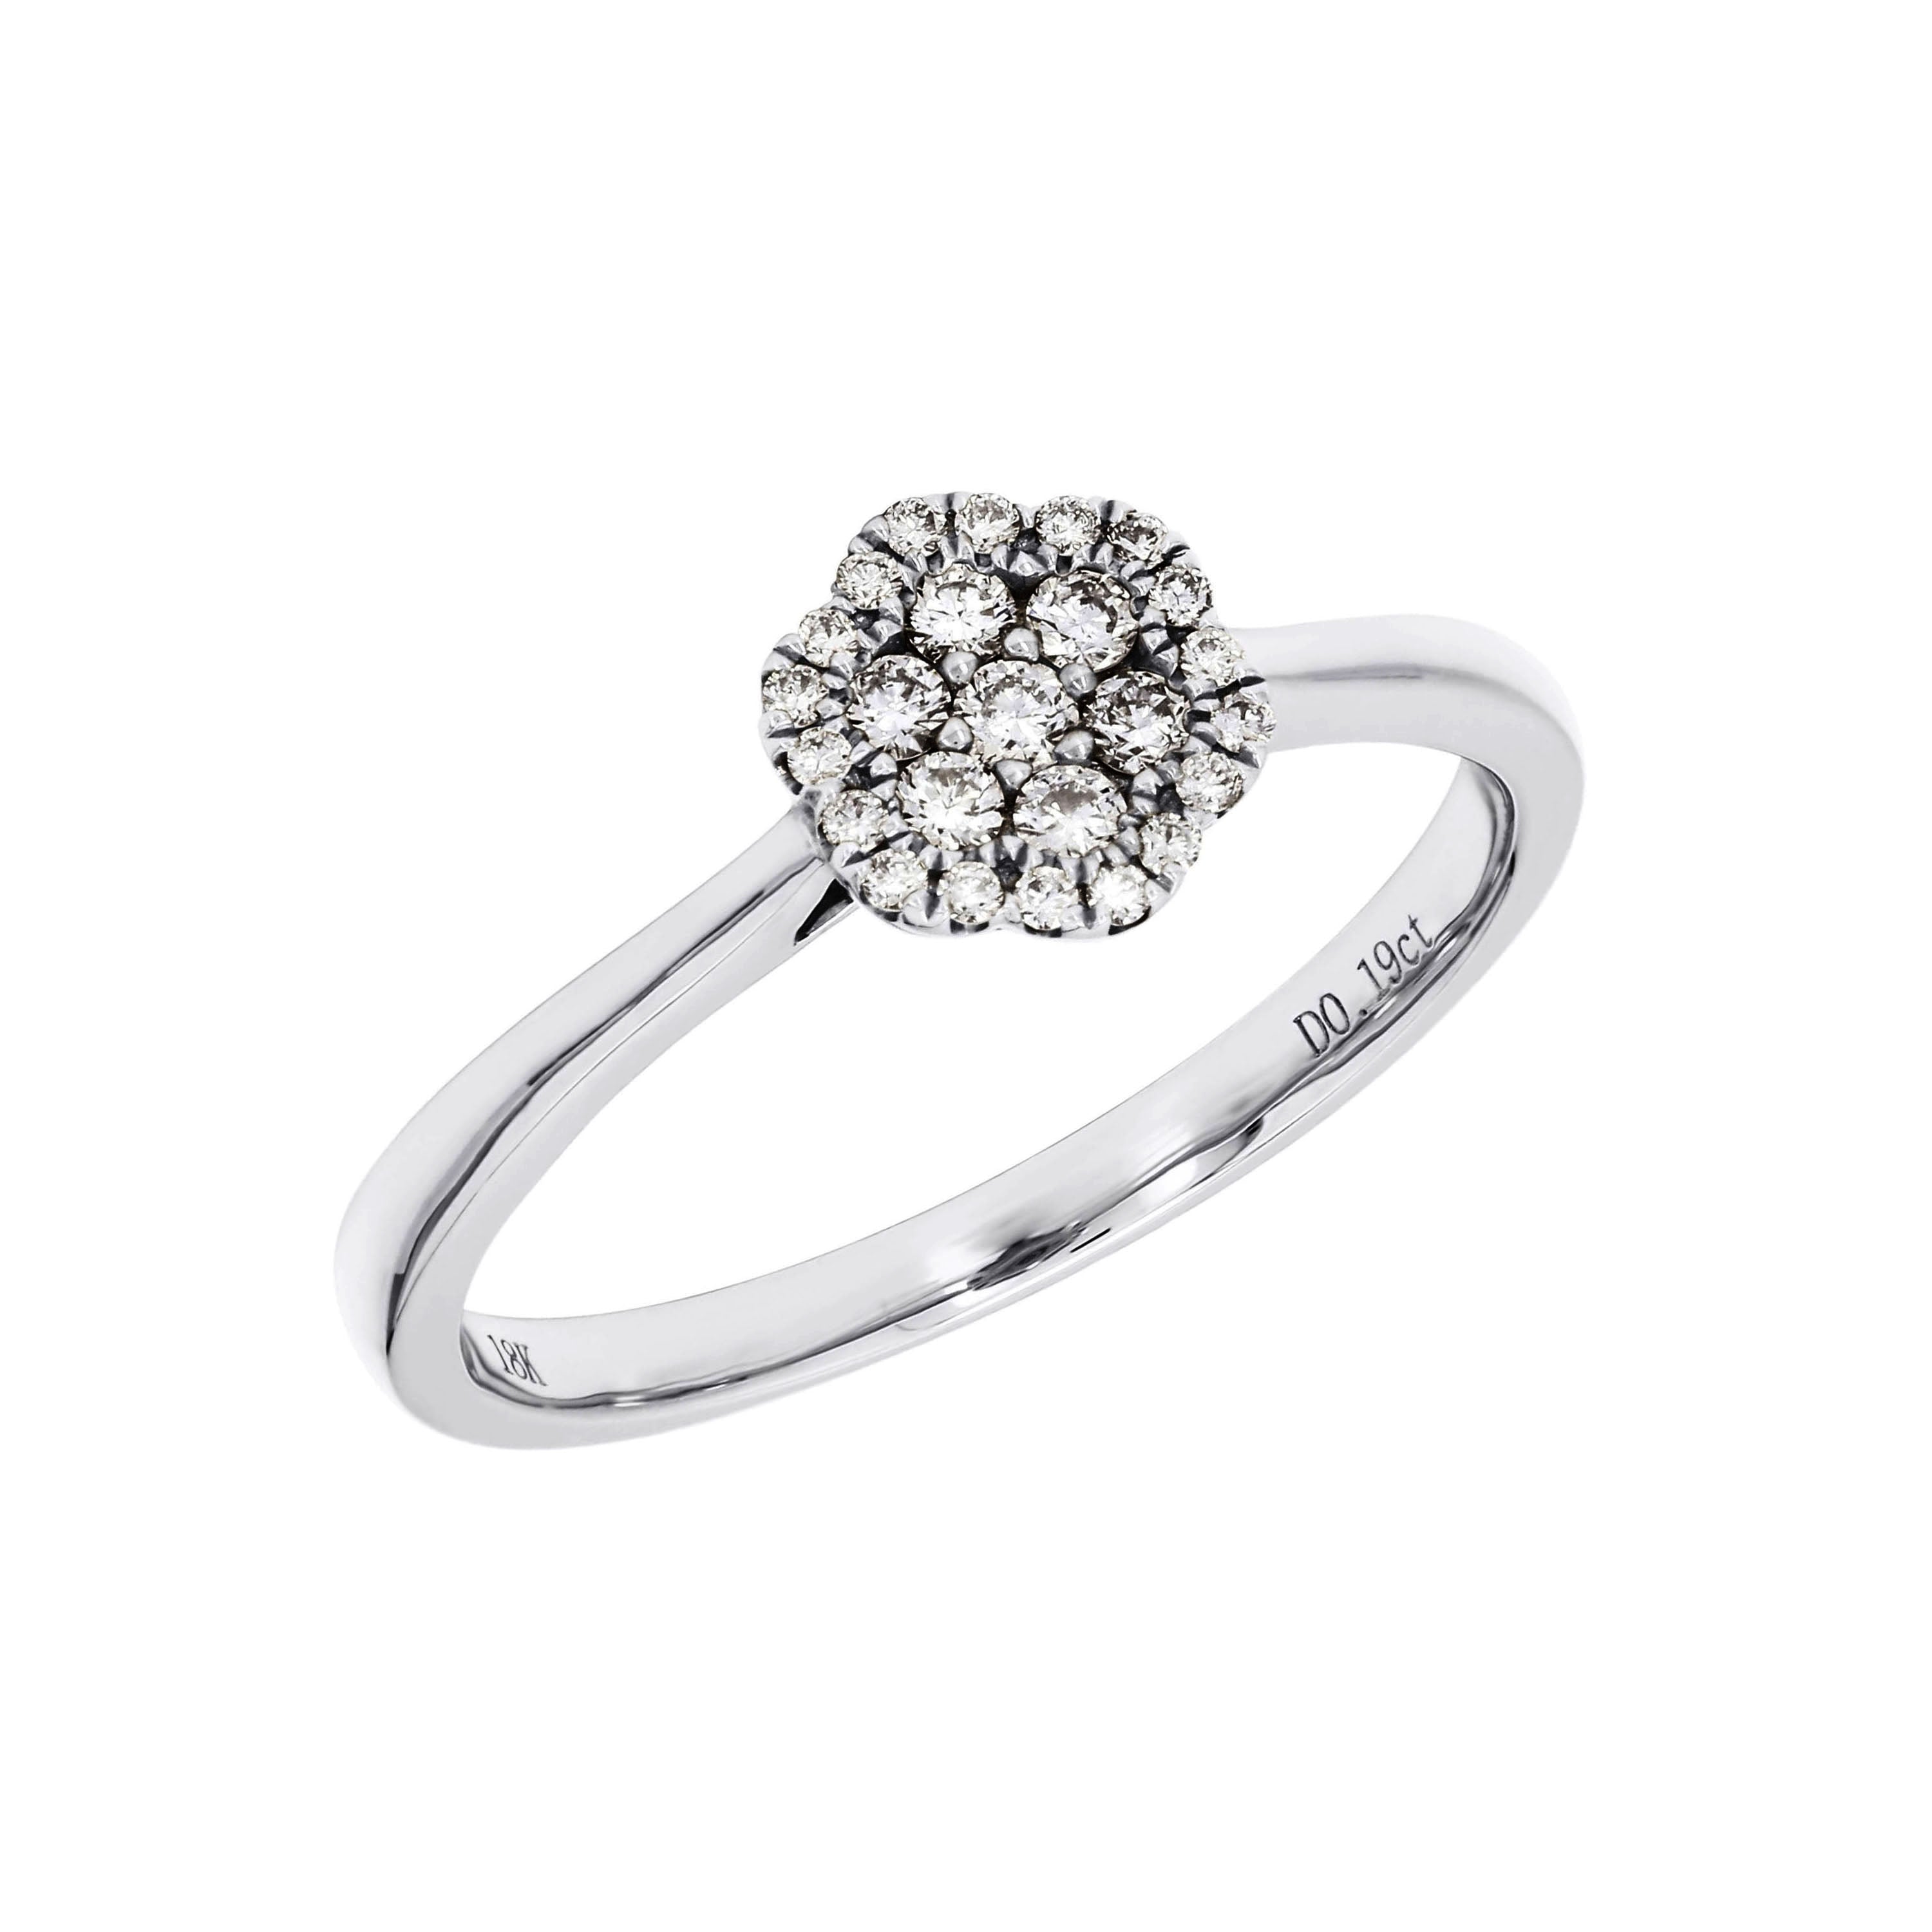 Adamar Jewels Sweet Floral Ring in 18K white gold set with diamonds